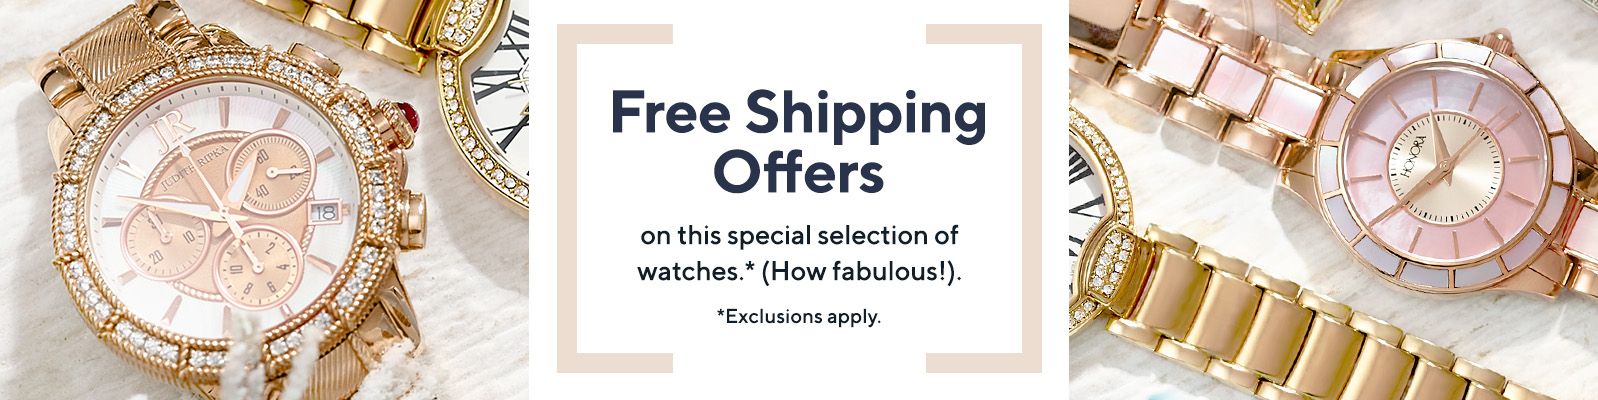 Free Shipping Offers  on this special selection of watches.* (How fabulous!).  *Exclusions apply.